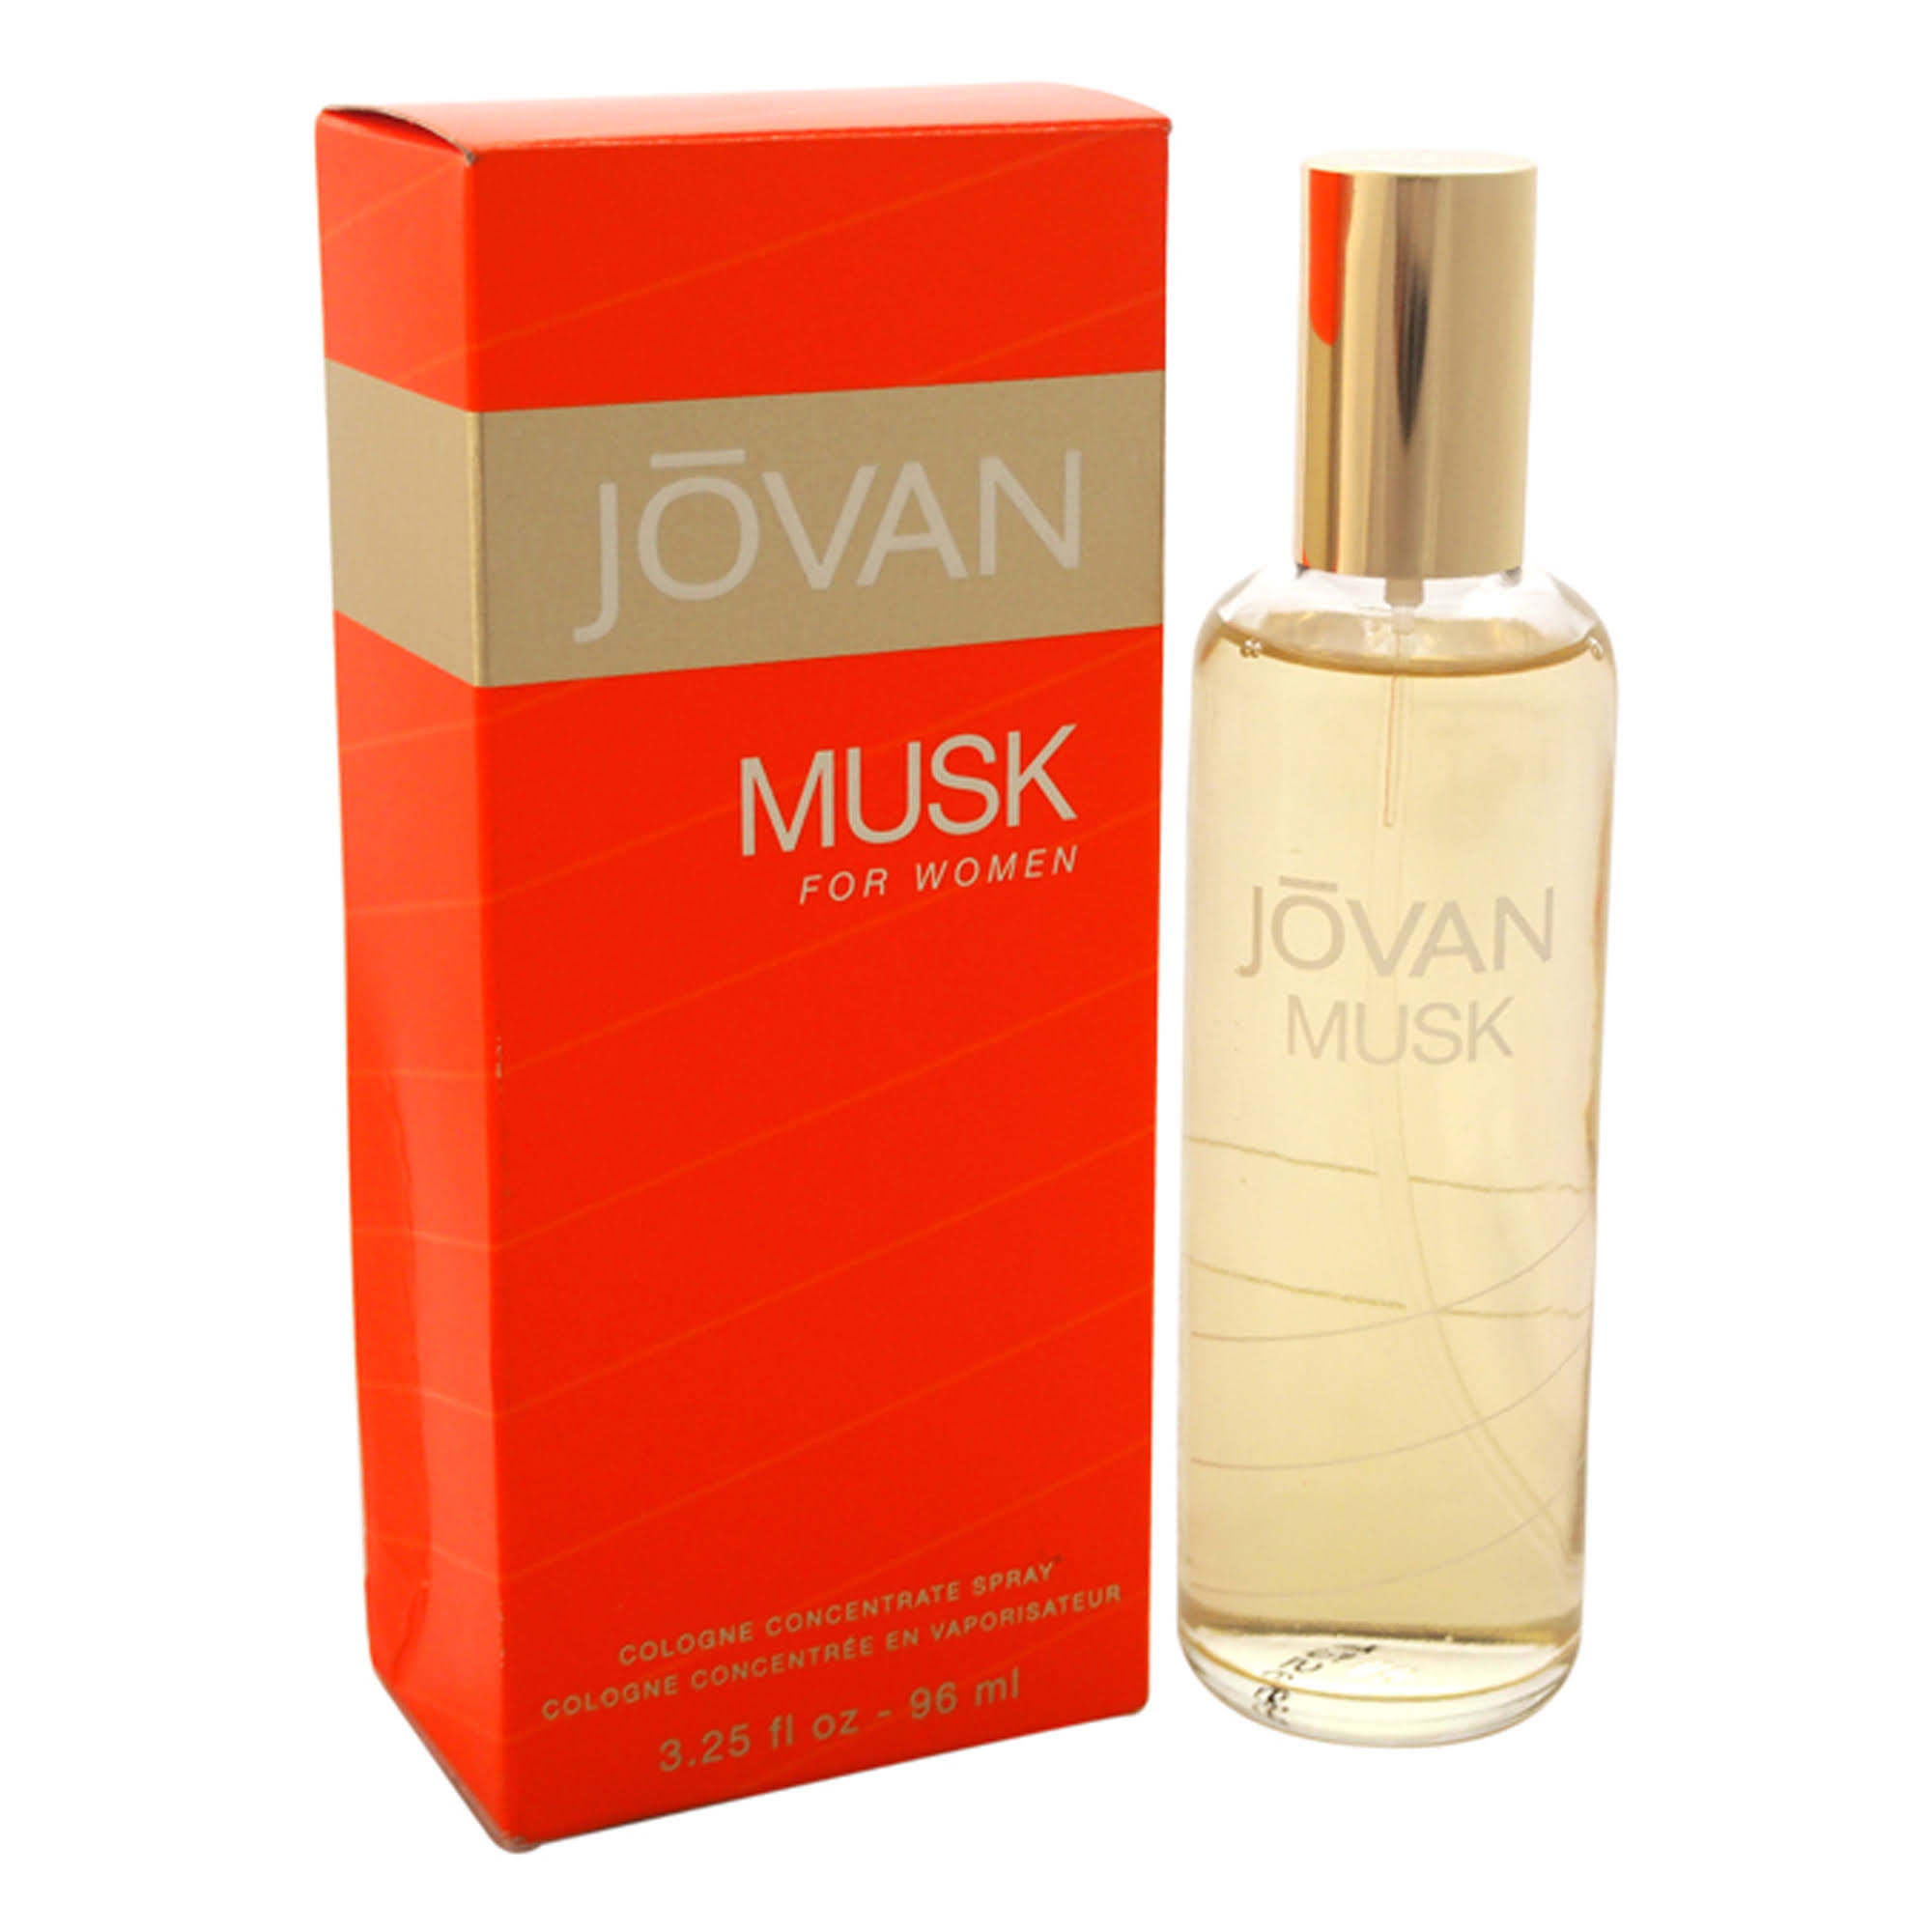 Jovan Musk for Women Cologne Concentrate Spray - 3.25oz